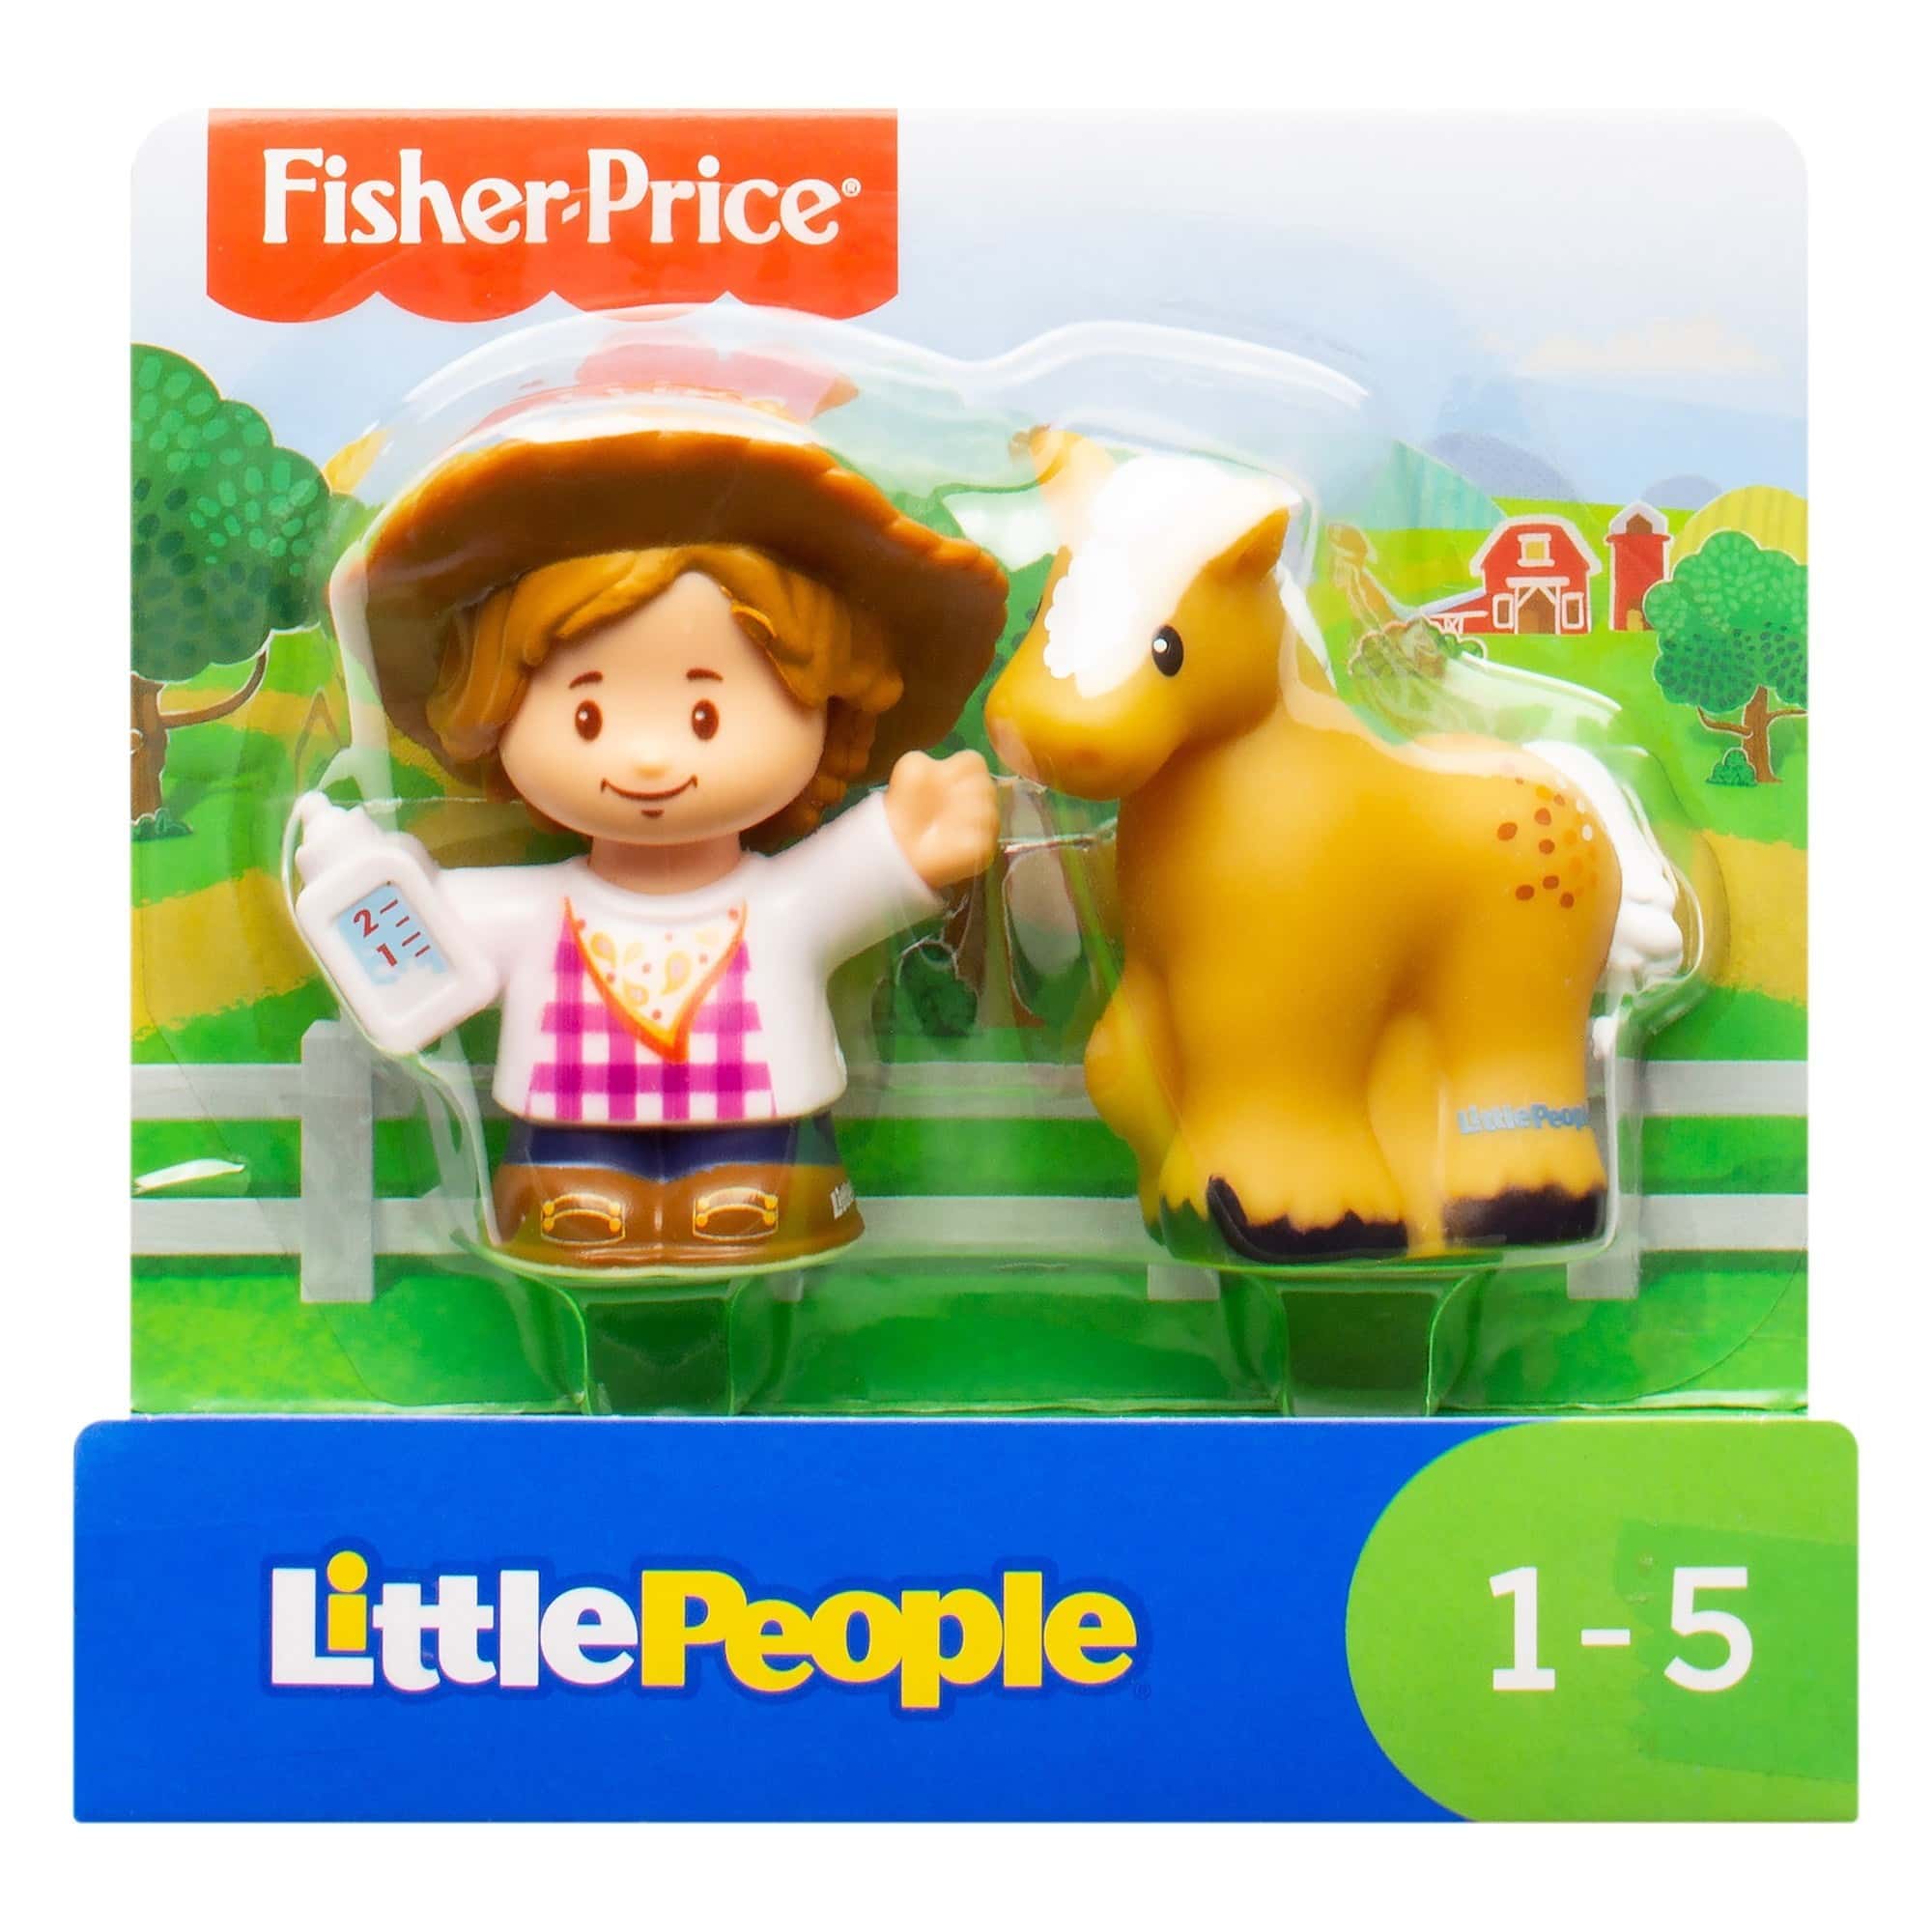 Fisher Price - Little People Figures - Farmer Melodee and Pony